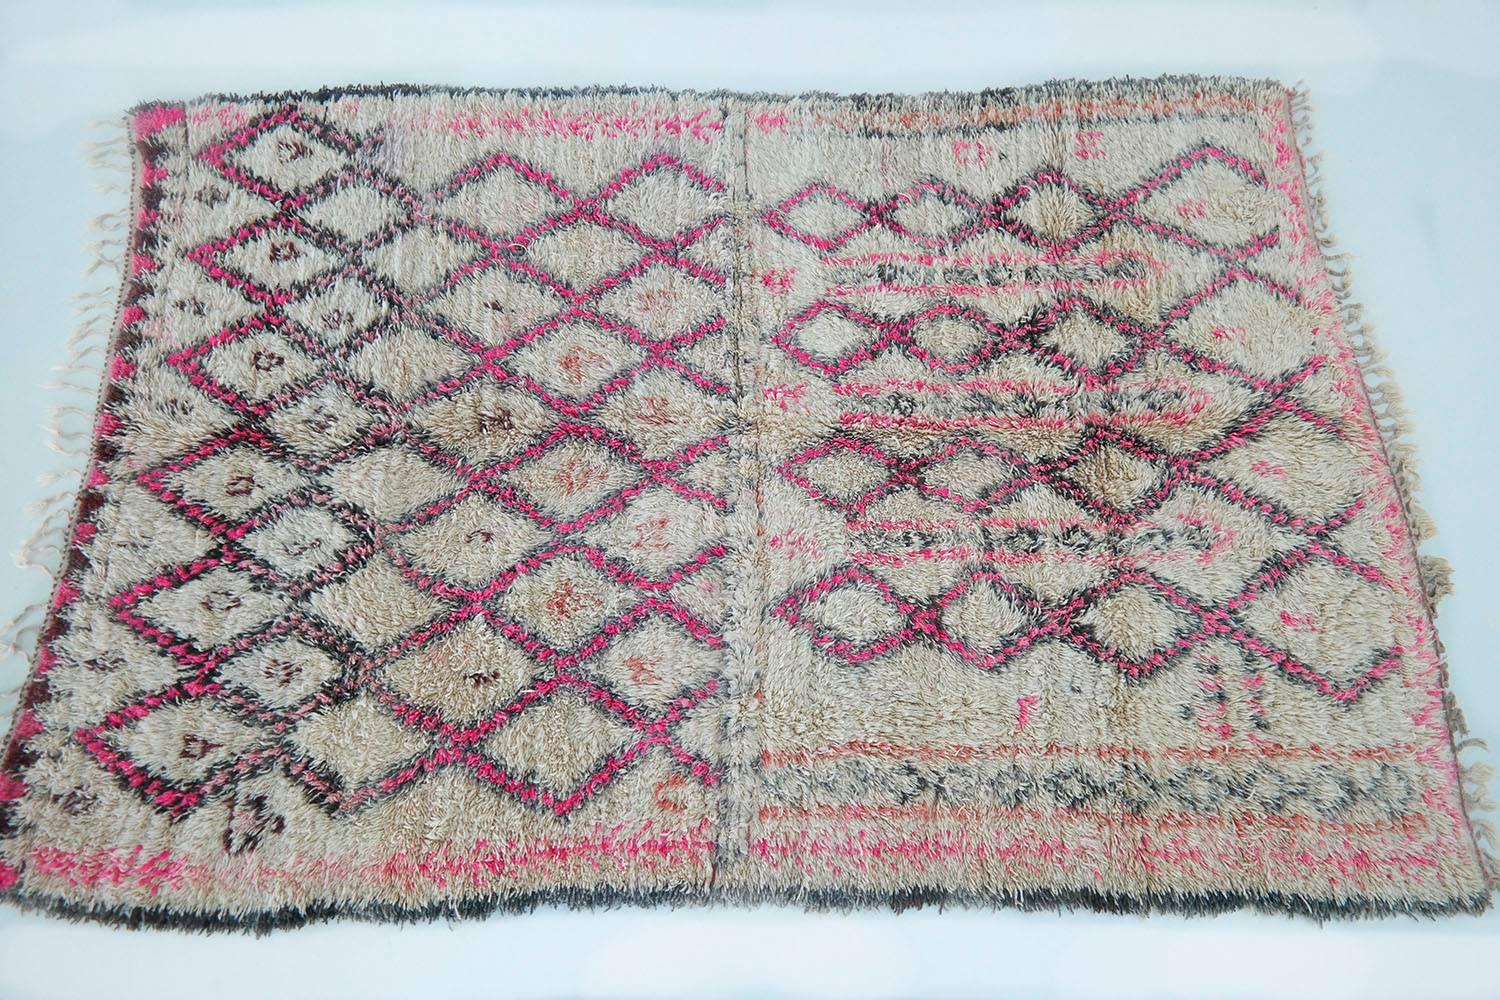 Beni Ourain rug ''Pink Devine''

This is truly an amazingly gorgeous vintage Morroccan Beni Ourain rug in great condition. This beauty has the most prettiest pink diamond pattern with a lovely creamy ivory base. Her wool is very soft and feels